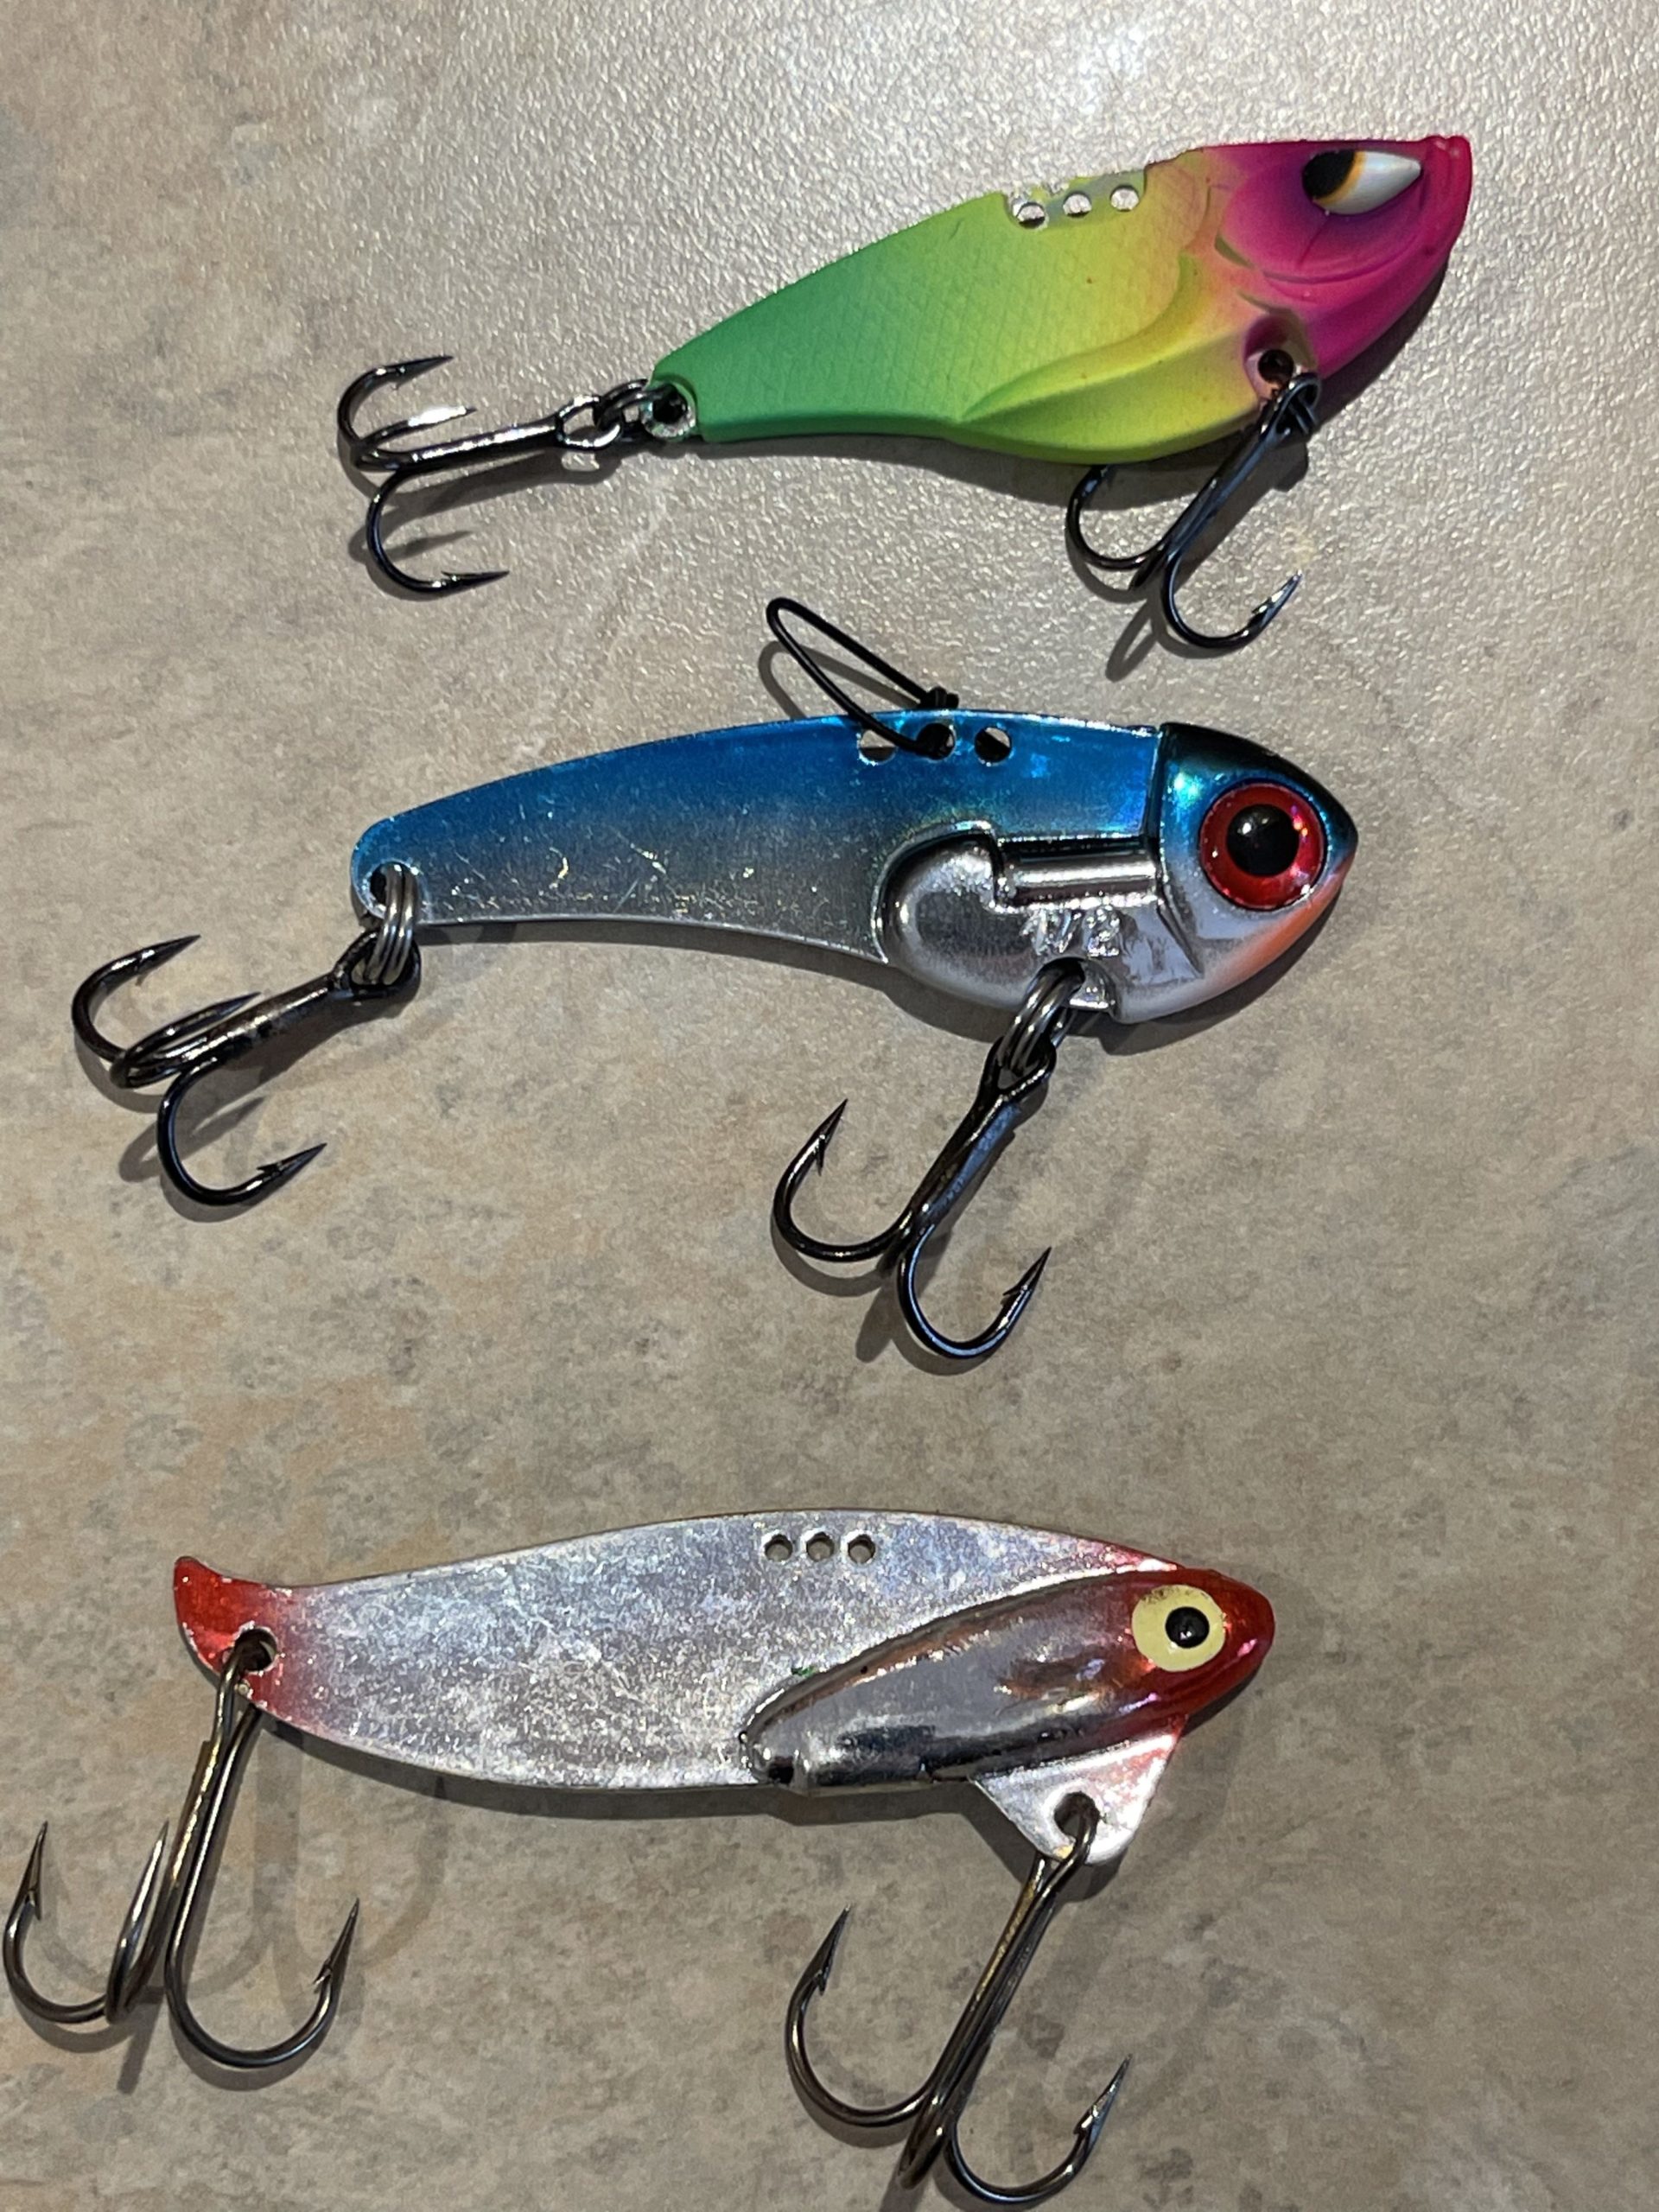 How To Make Fishing Lures: Fishing Jig Making - Without Expensive Moulds?